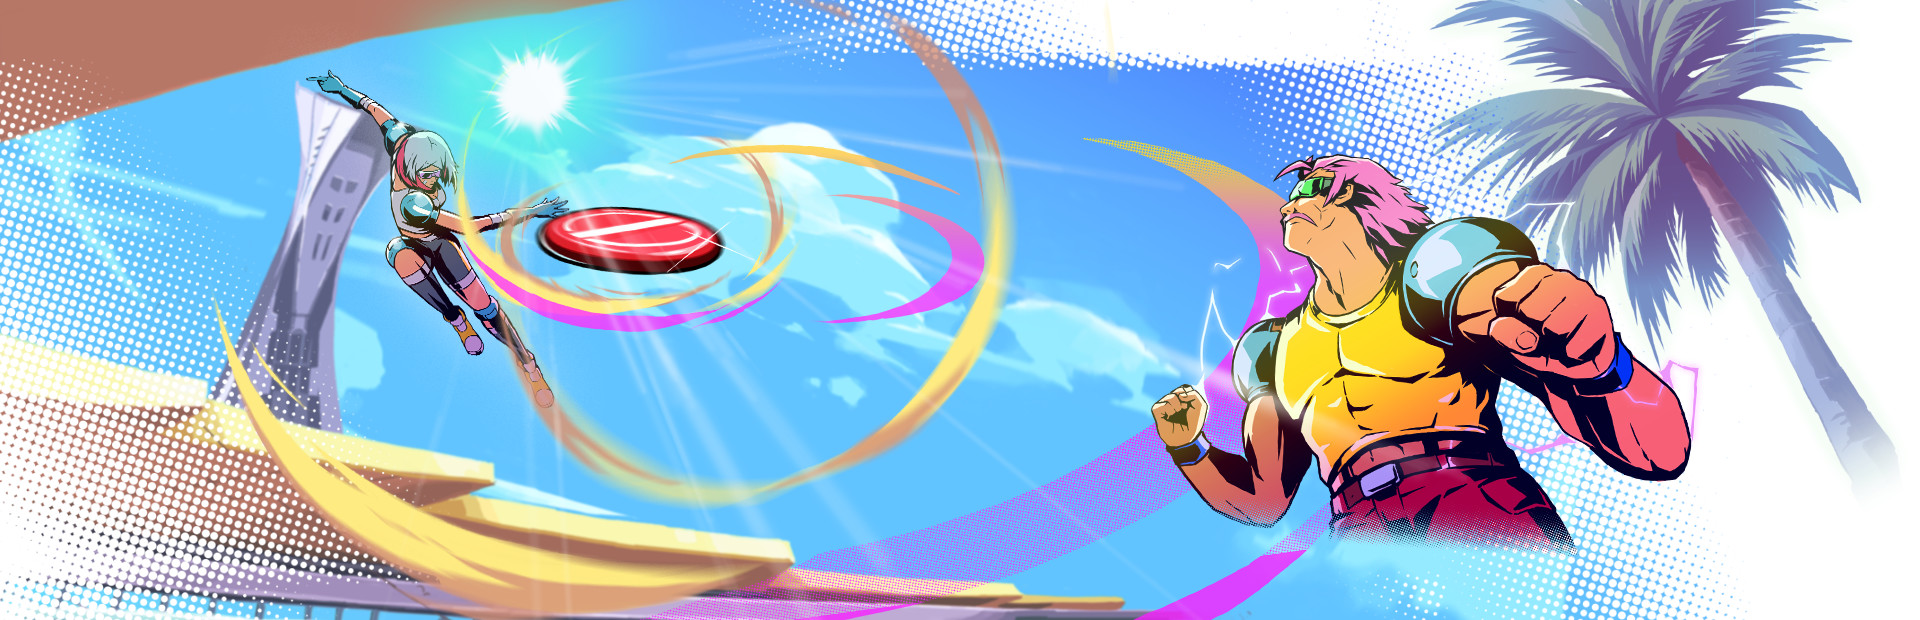 Windjammers 2 cover image